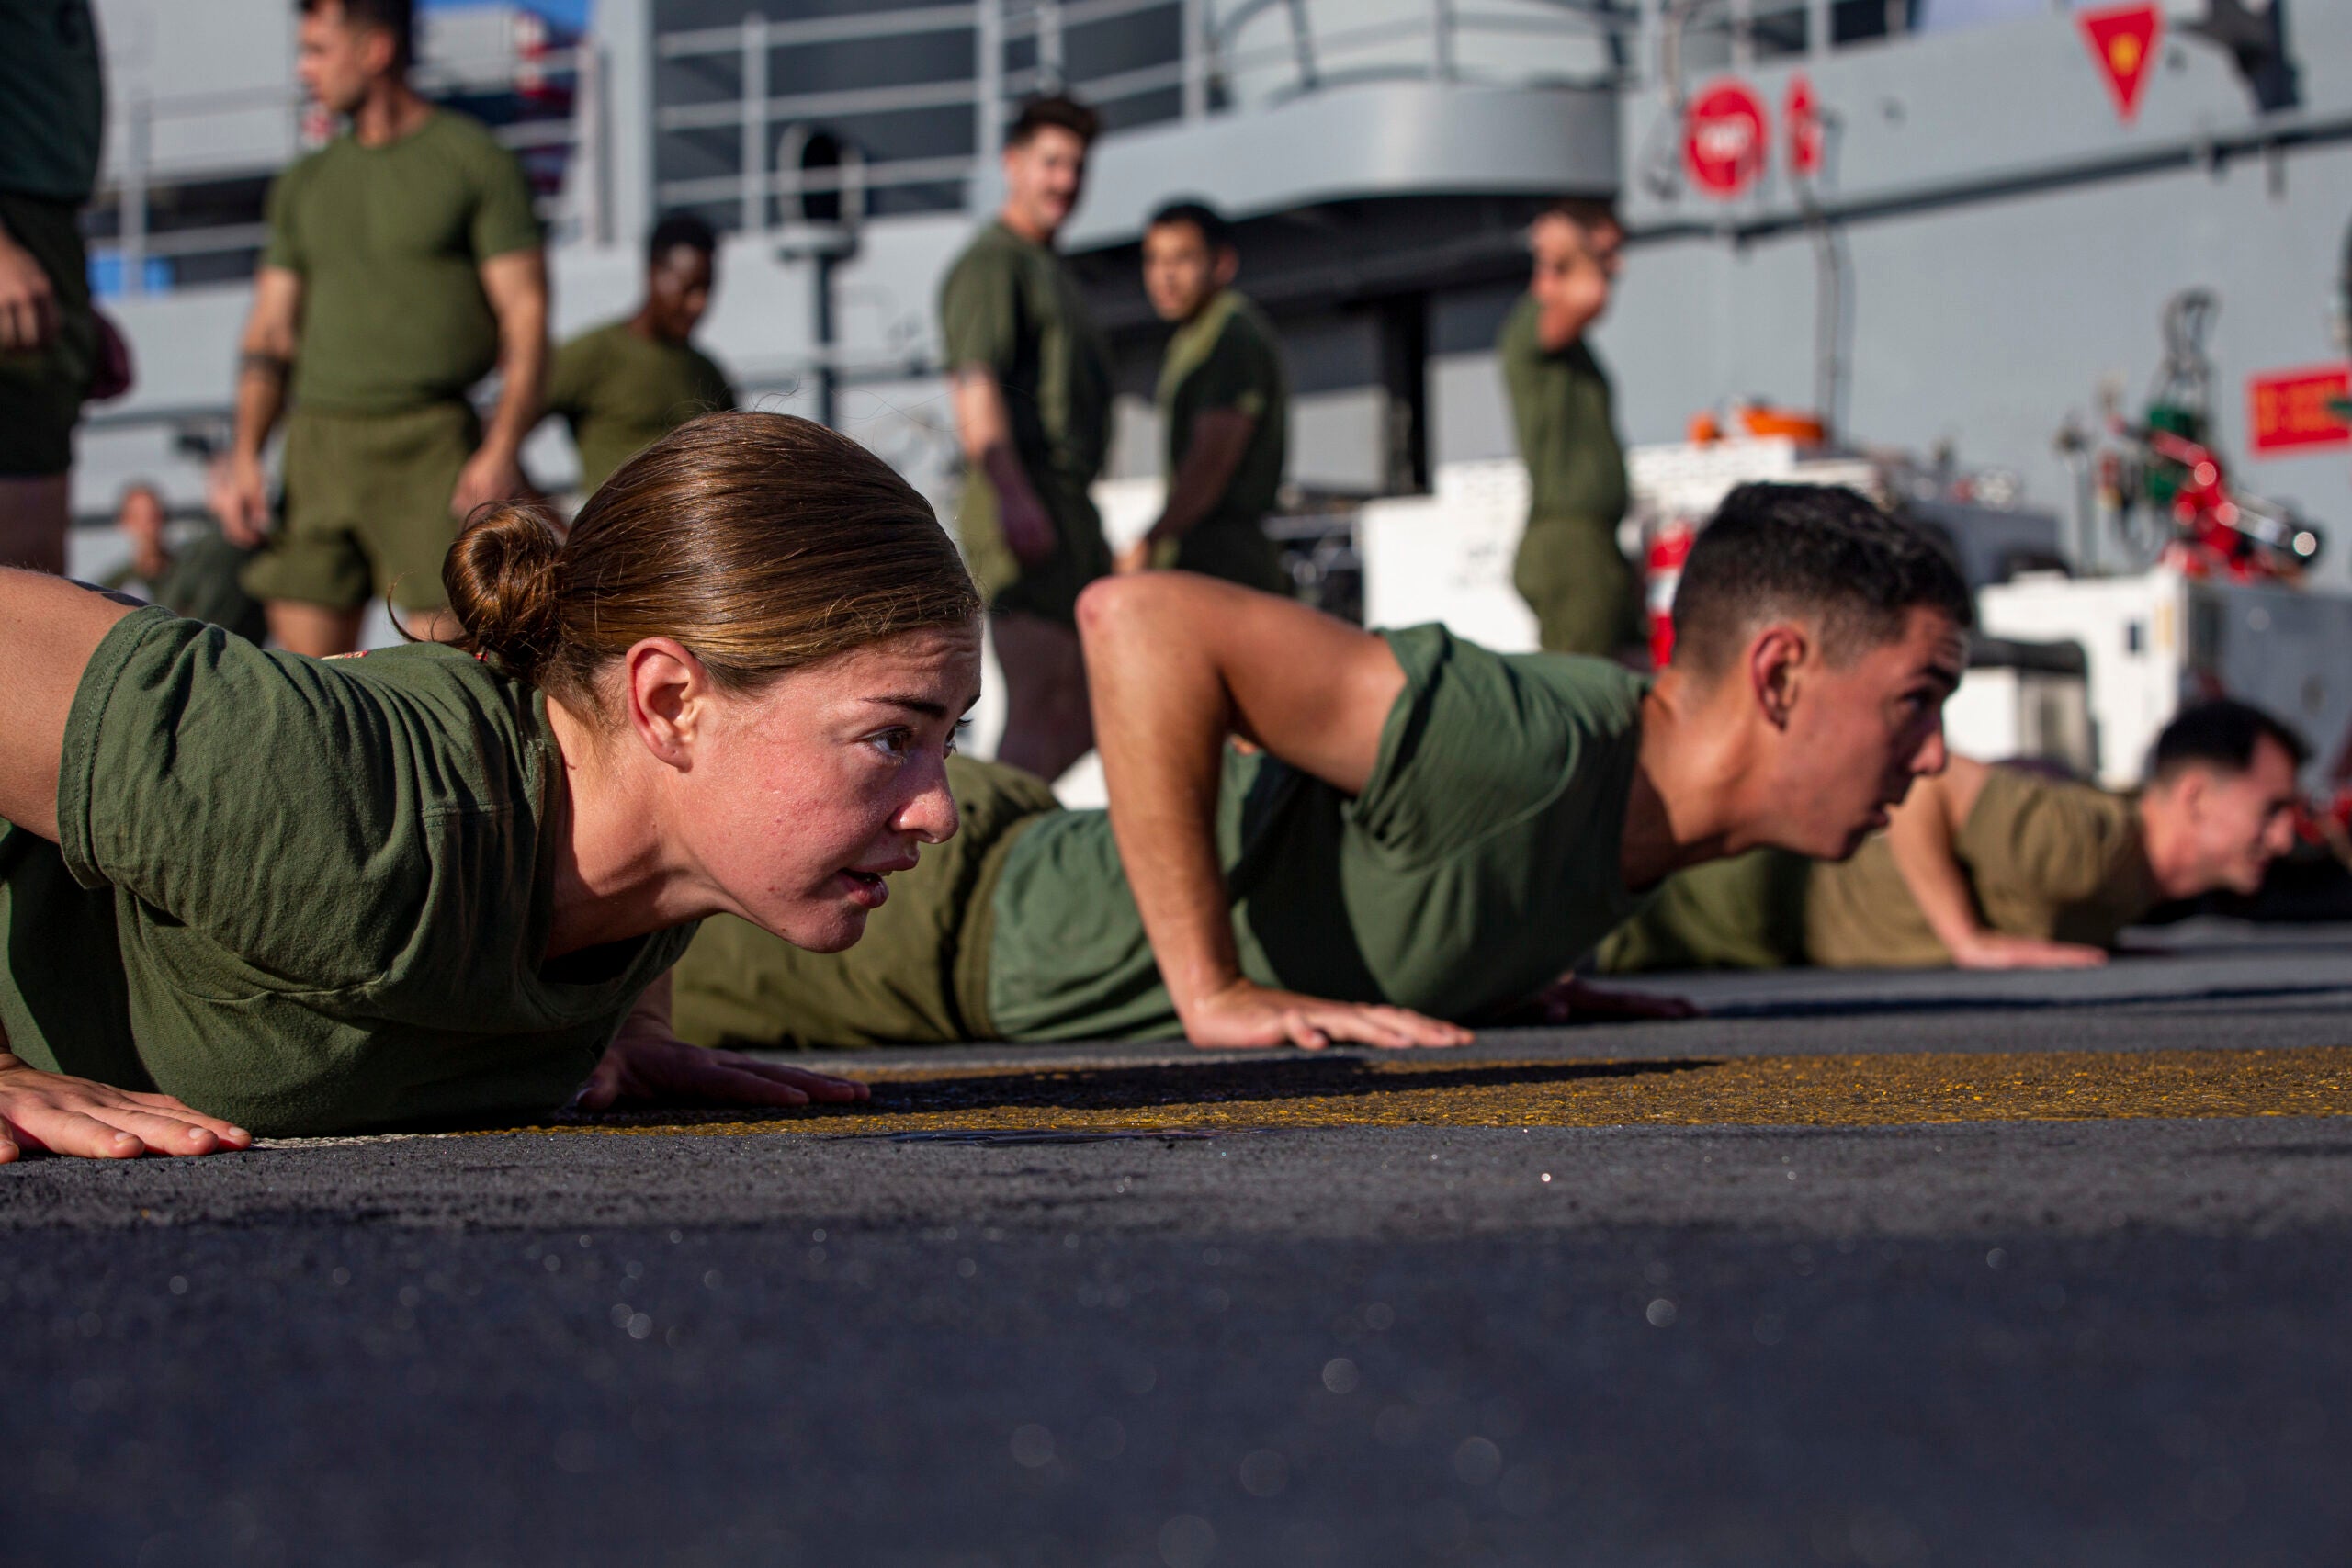 U.S. Marine Corps Lance Cpl. Claudia Murphy, a mortarman with Battalion Landing Team (BLT) 3/5, 31st Marine Expeditionary Unit (MEU), prepares for a sprint during unit physical training on the flight deck aboard amphibious assault ship USS America (LHA 6), in the Pacific Ocean, July 10, 2021. The 31st MEU is operating aboard ships of the America Expeditionary Strike Group in the 7th fleet area of operations to enhance interoperability with allies and partners and serve as a ready response force to defend peace and stability in the Indo-Pacific region. Murphy is a native of St. Albans Vermont. (U.S. Marine Corps photo by Cpl. Karis Mattingly)